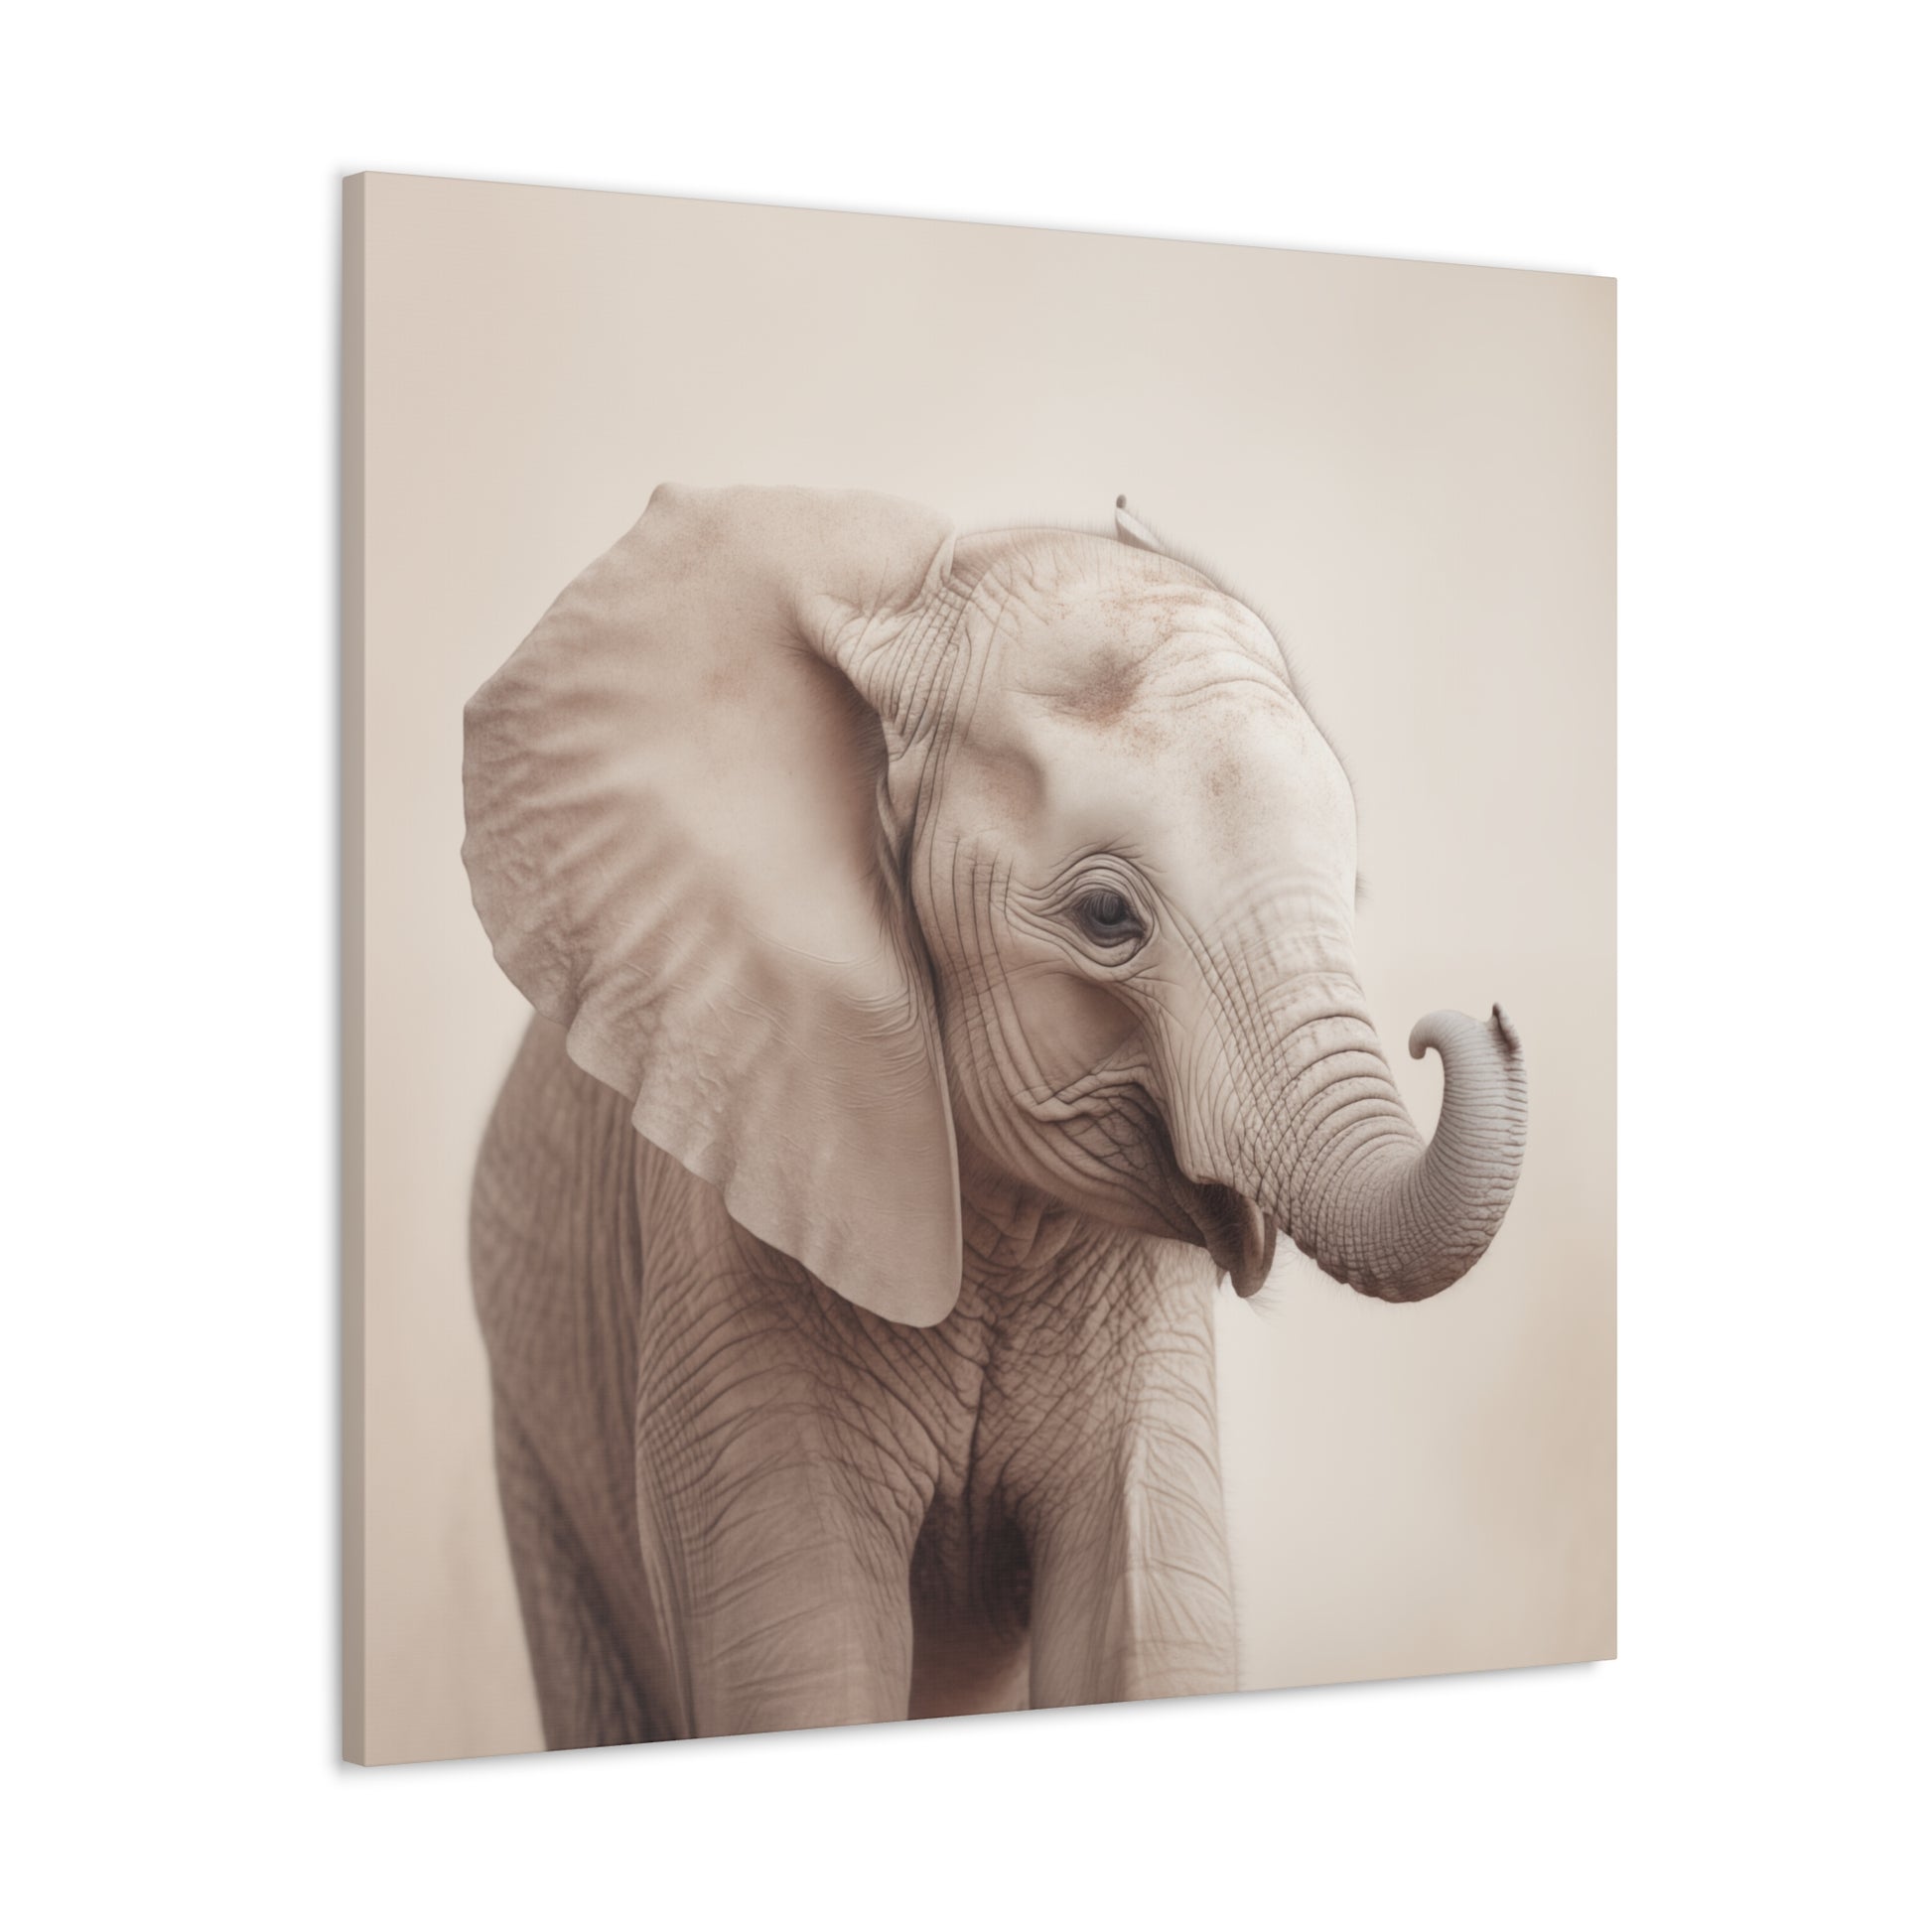 "Baby Elephant Portrait" Wall Art - Weave Got Gifts - Unique Gifts You Won’t Find Anywhere Else!